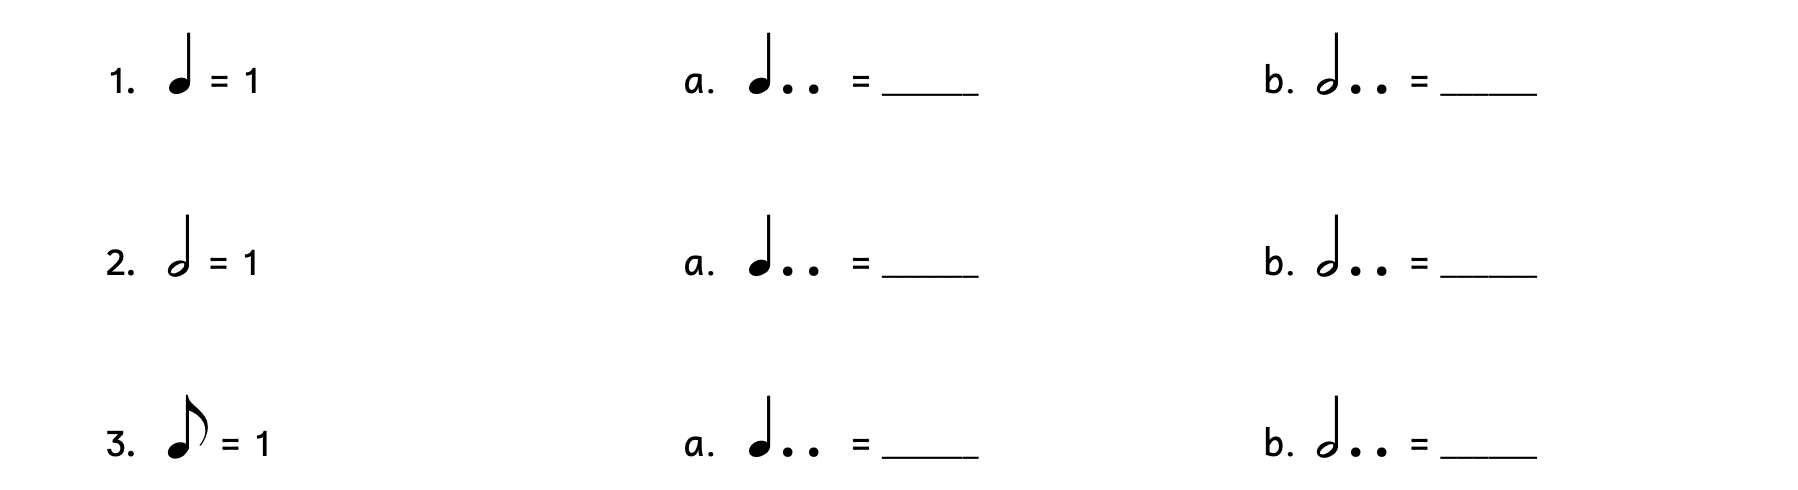 Number 1, a quarter note equals 1. Part A, value of a double dotted quarter note. Part B, value of a double dotted half note. Number 2, a half note equals 1. Part A, value of a double dotted quarter note. Part B, value of a double dotted half note. Number 3, eighth not equals 1. Example A, value of a double dotted quarter note. Example B, value of a double dotted half note.